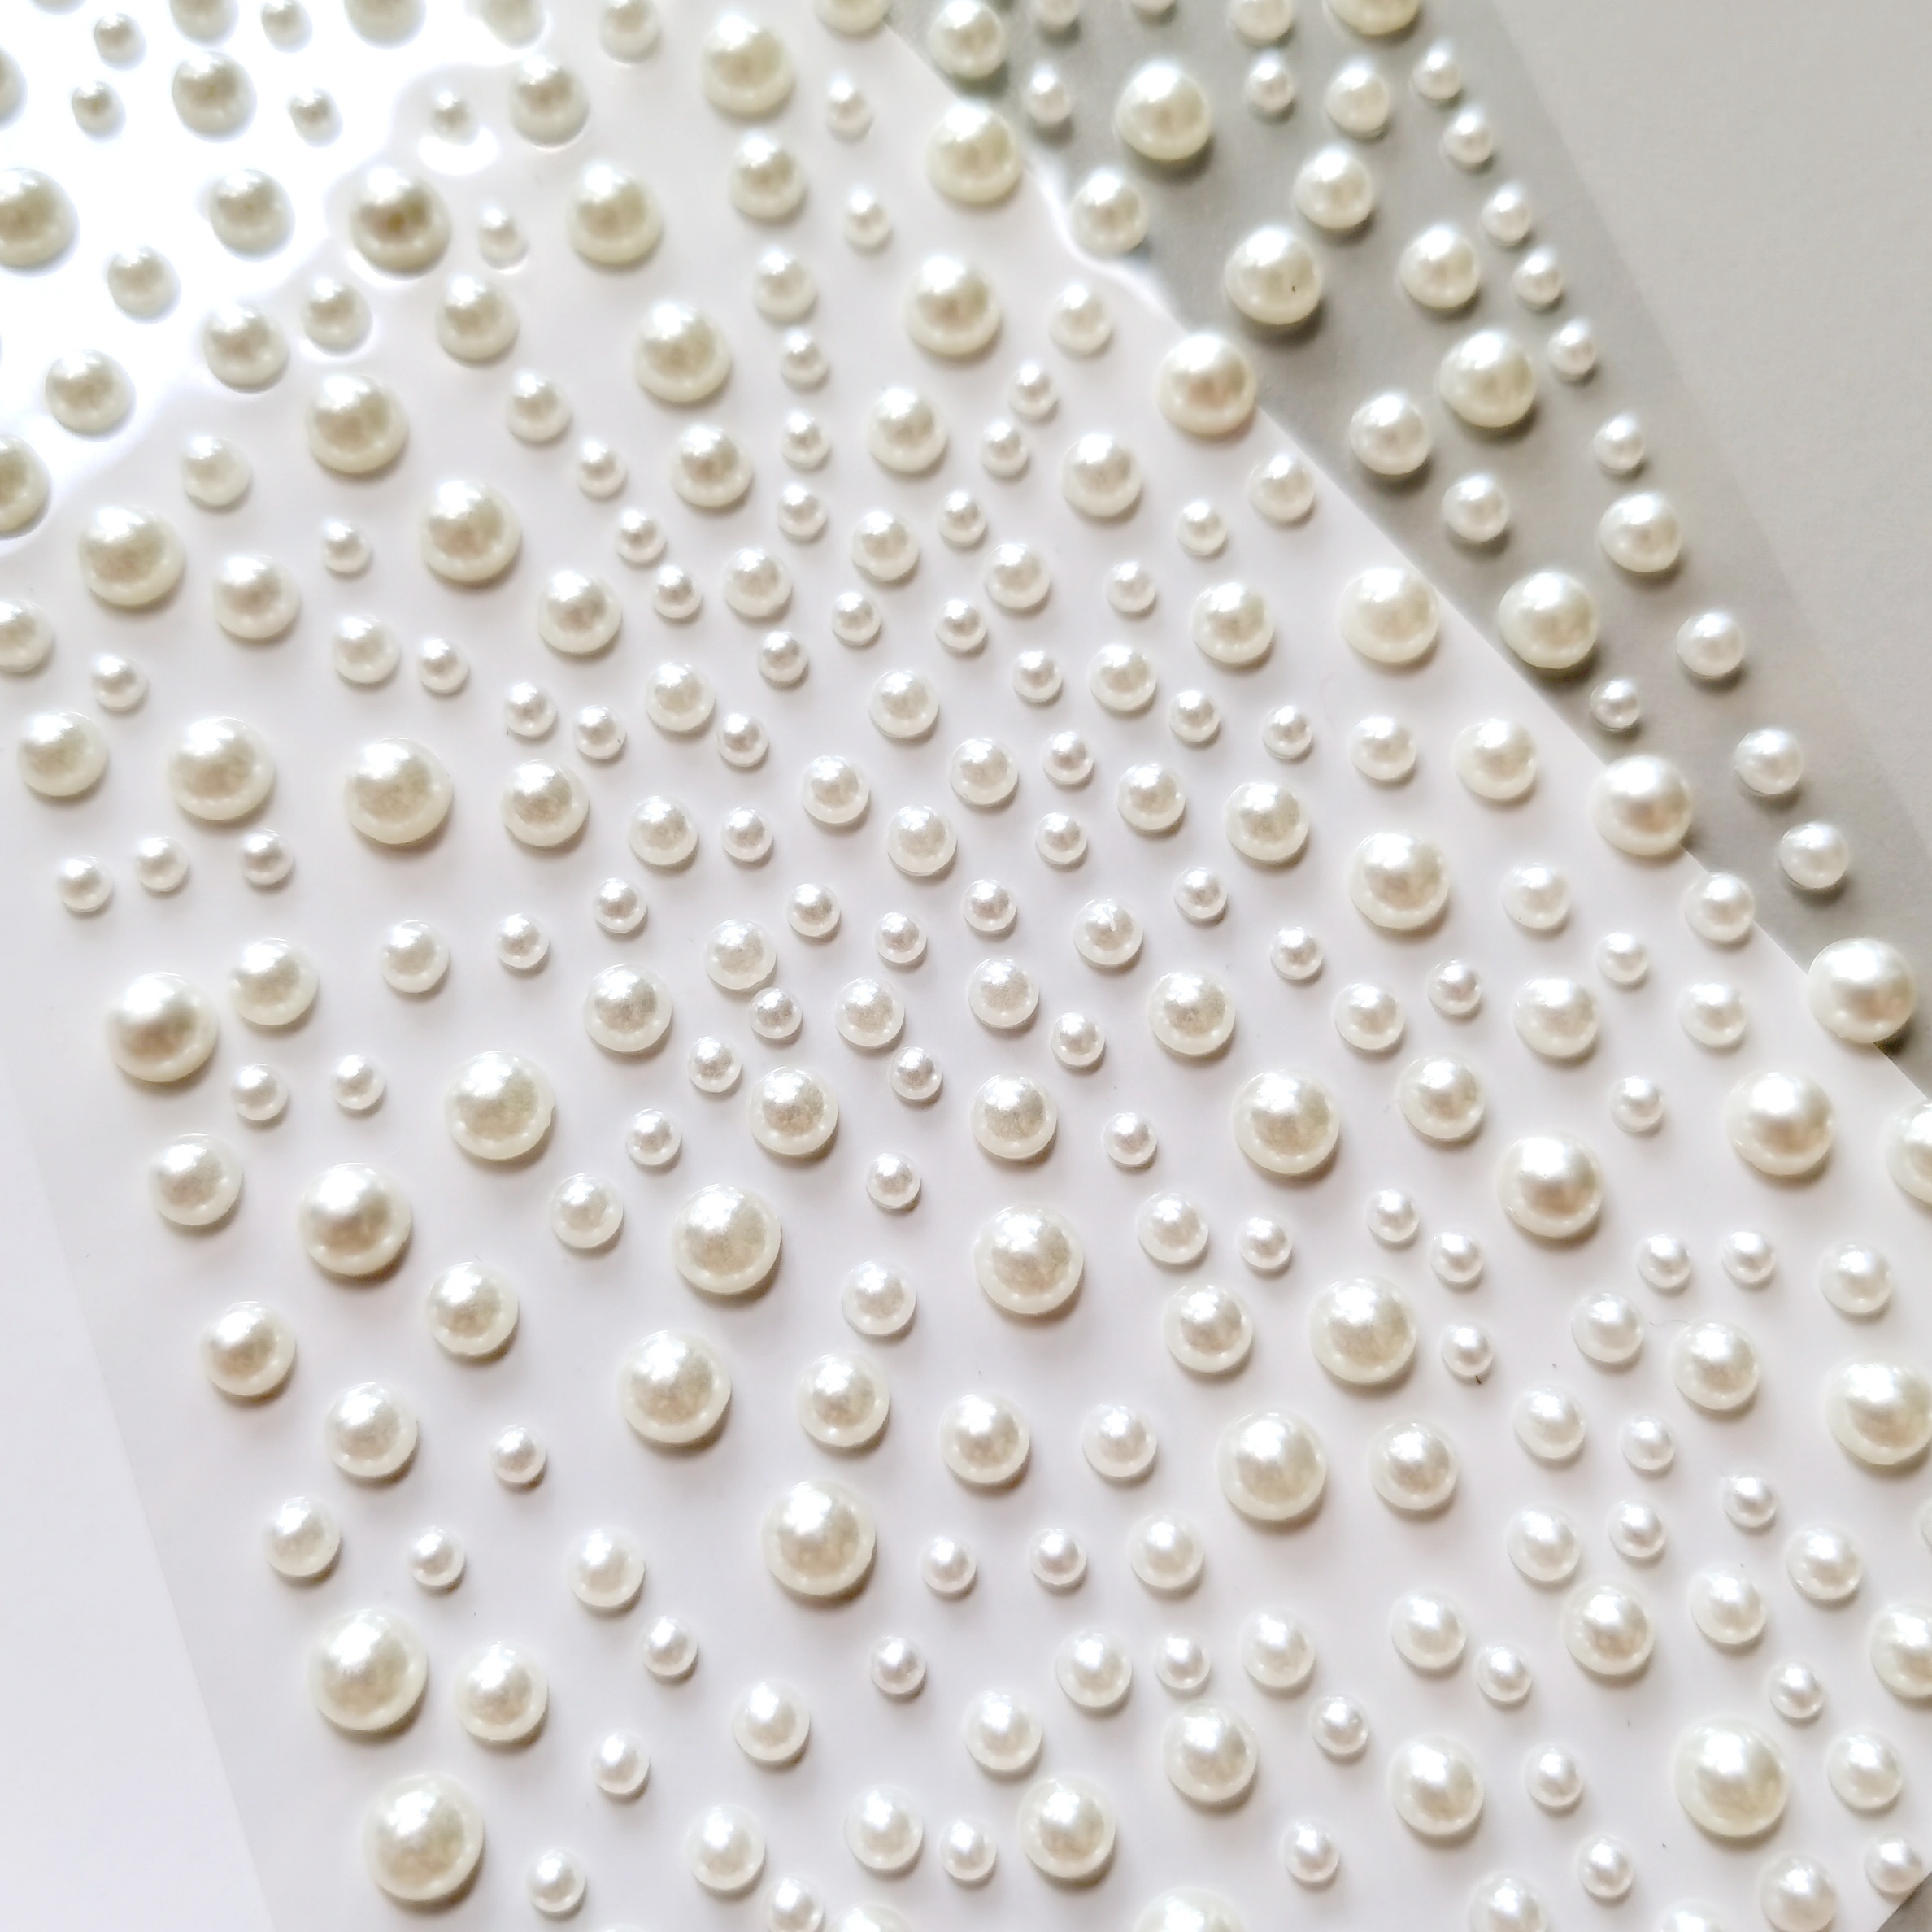 3mm Half Pearl Stickers, ABS White Pearls, Fake Pearls, Nail Decora, MiniatureSweet, Kawaii Resin Crafts, Decoden Cabochons Supplies